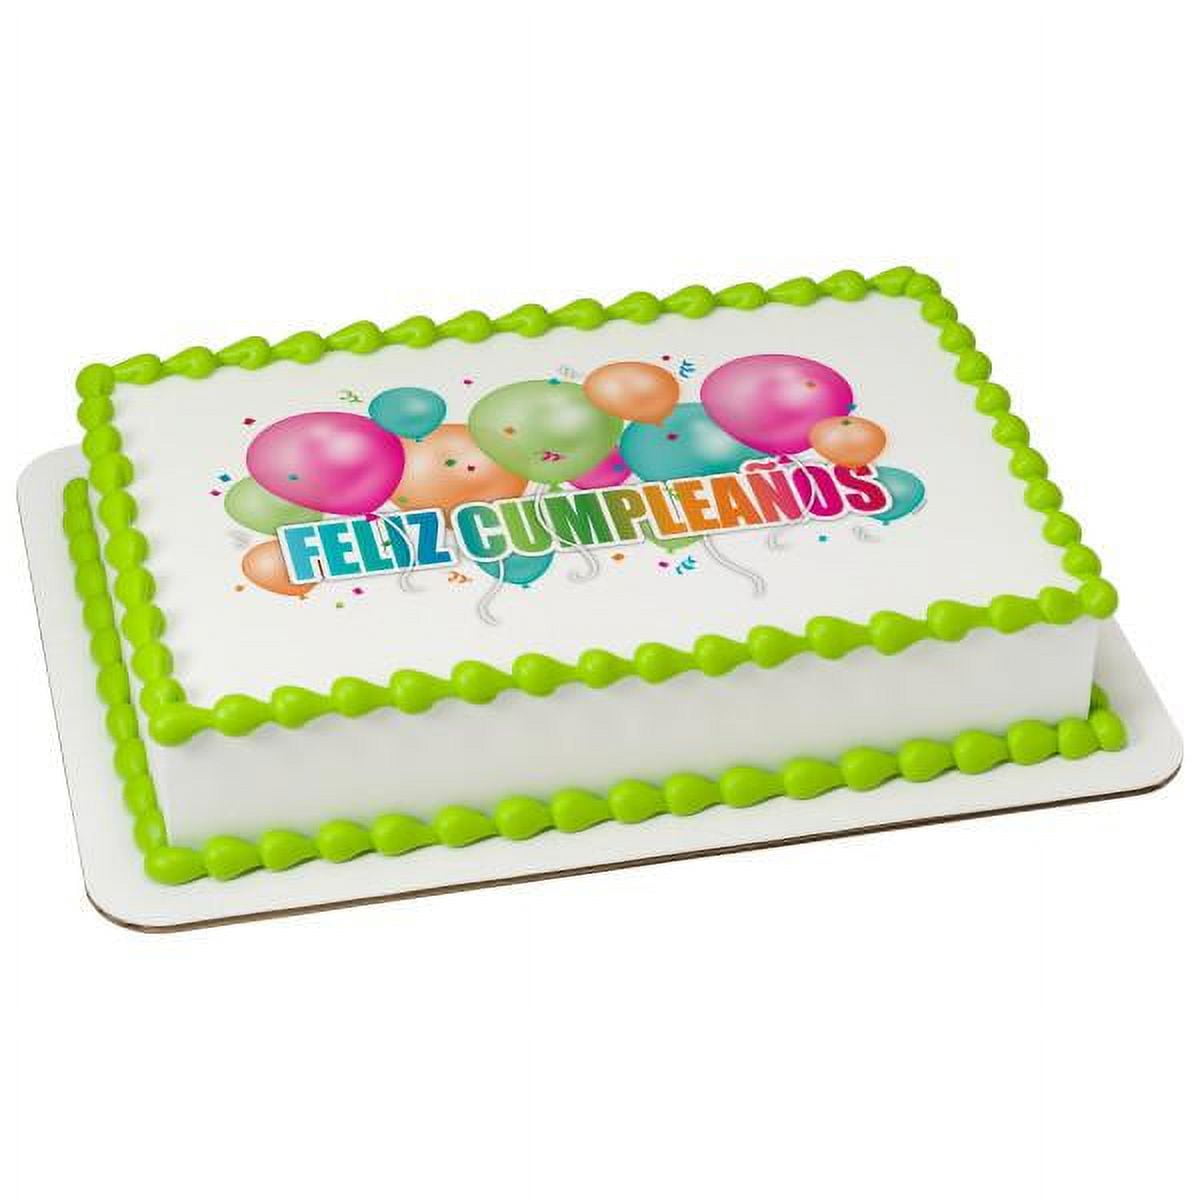 Shop Edible Cake Letters with great discounts and prices online